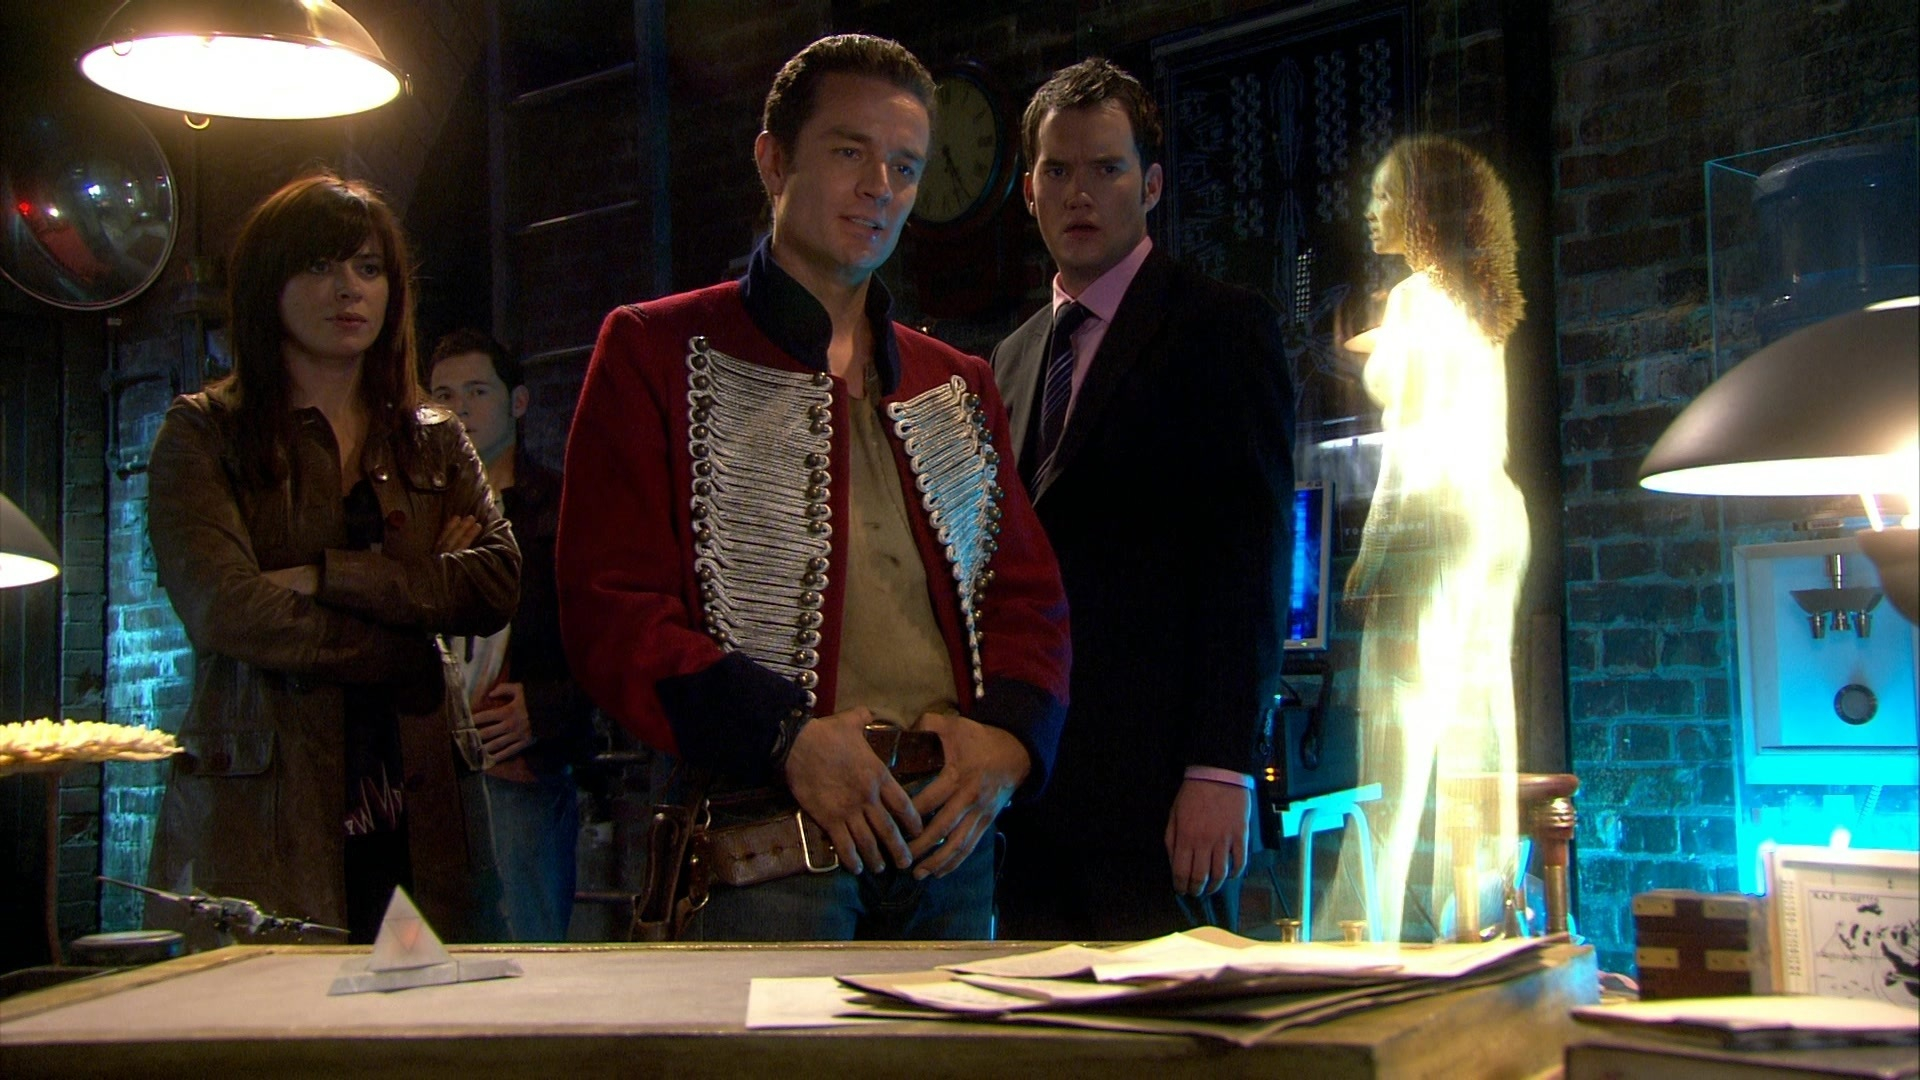 1920x1080 On This In 2008 Torchwood Returned for Series 2 Blogtor Wh